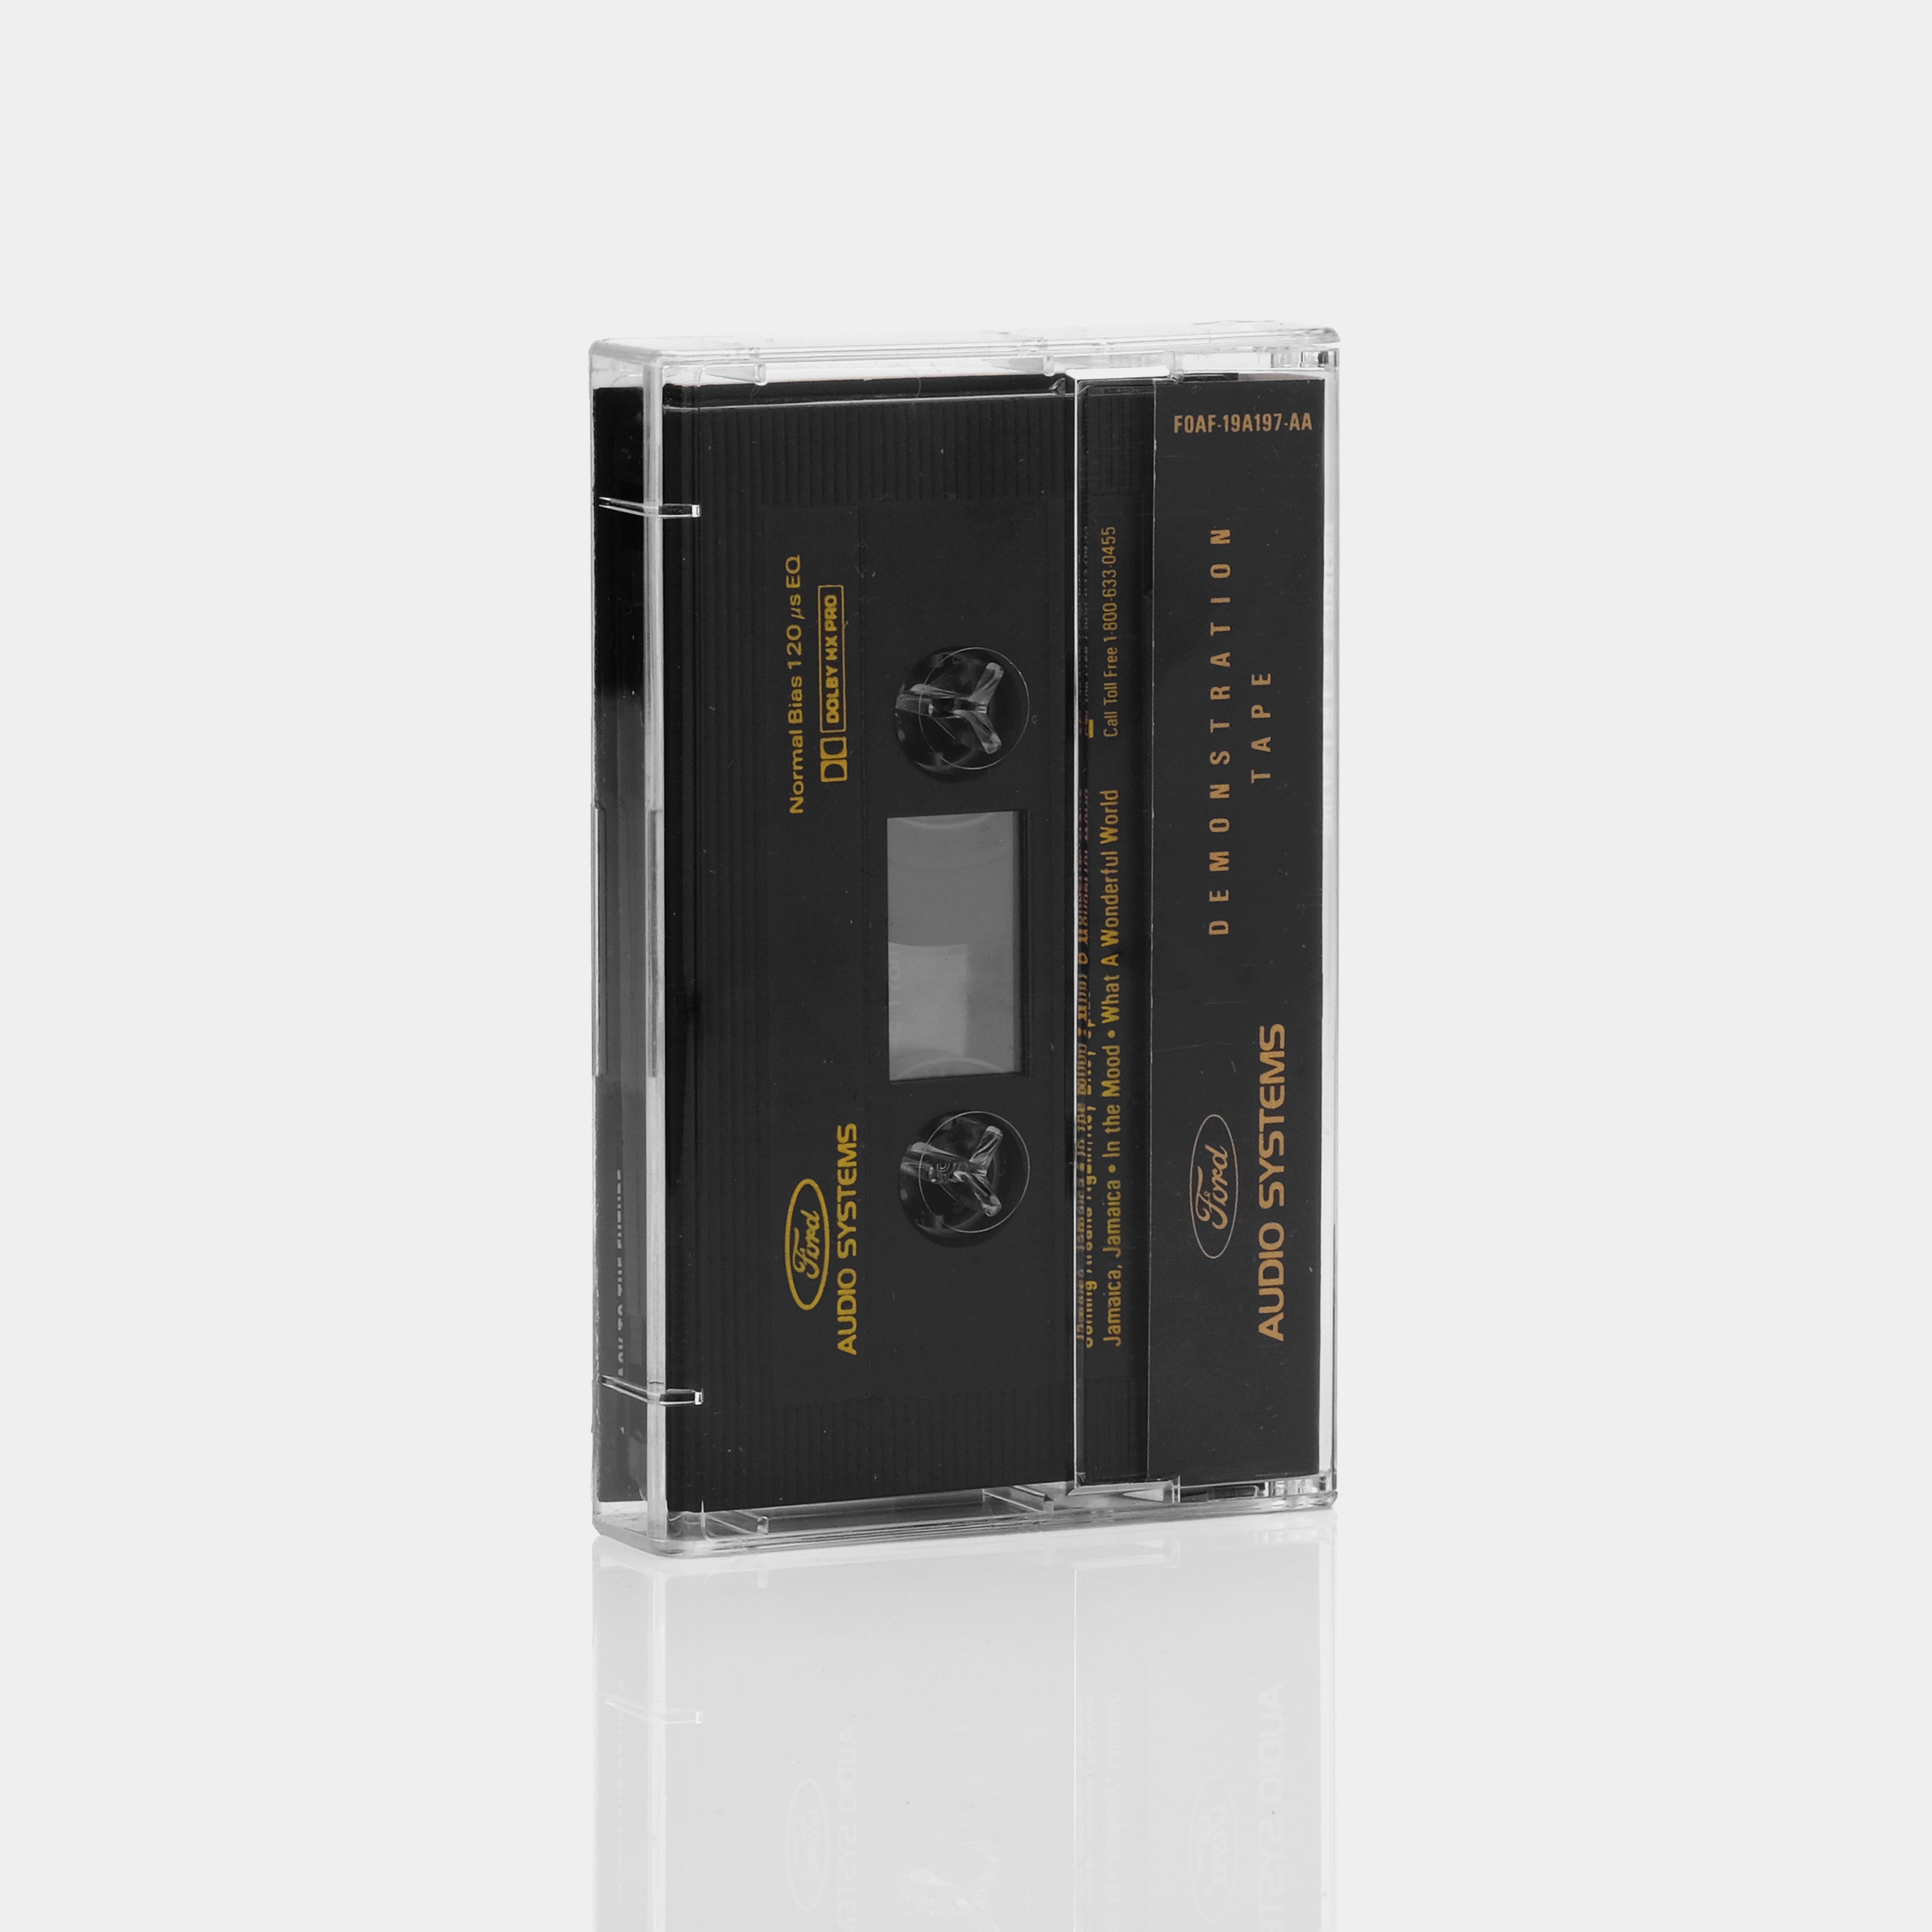 Ford Audio Systems Demonstration Cassette Tape